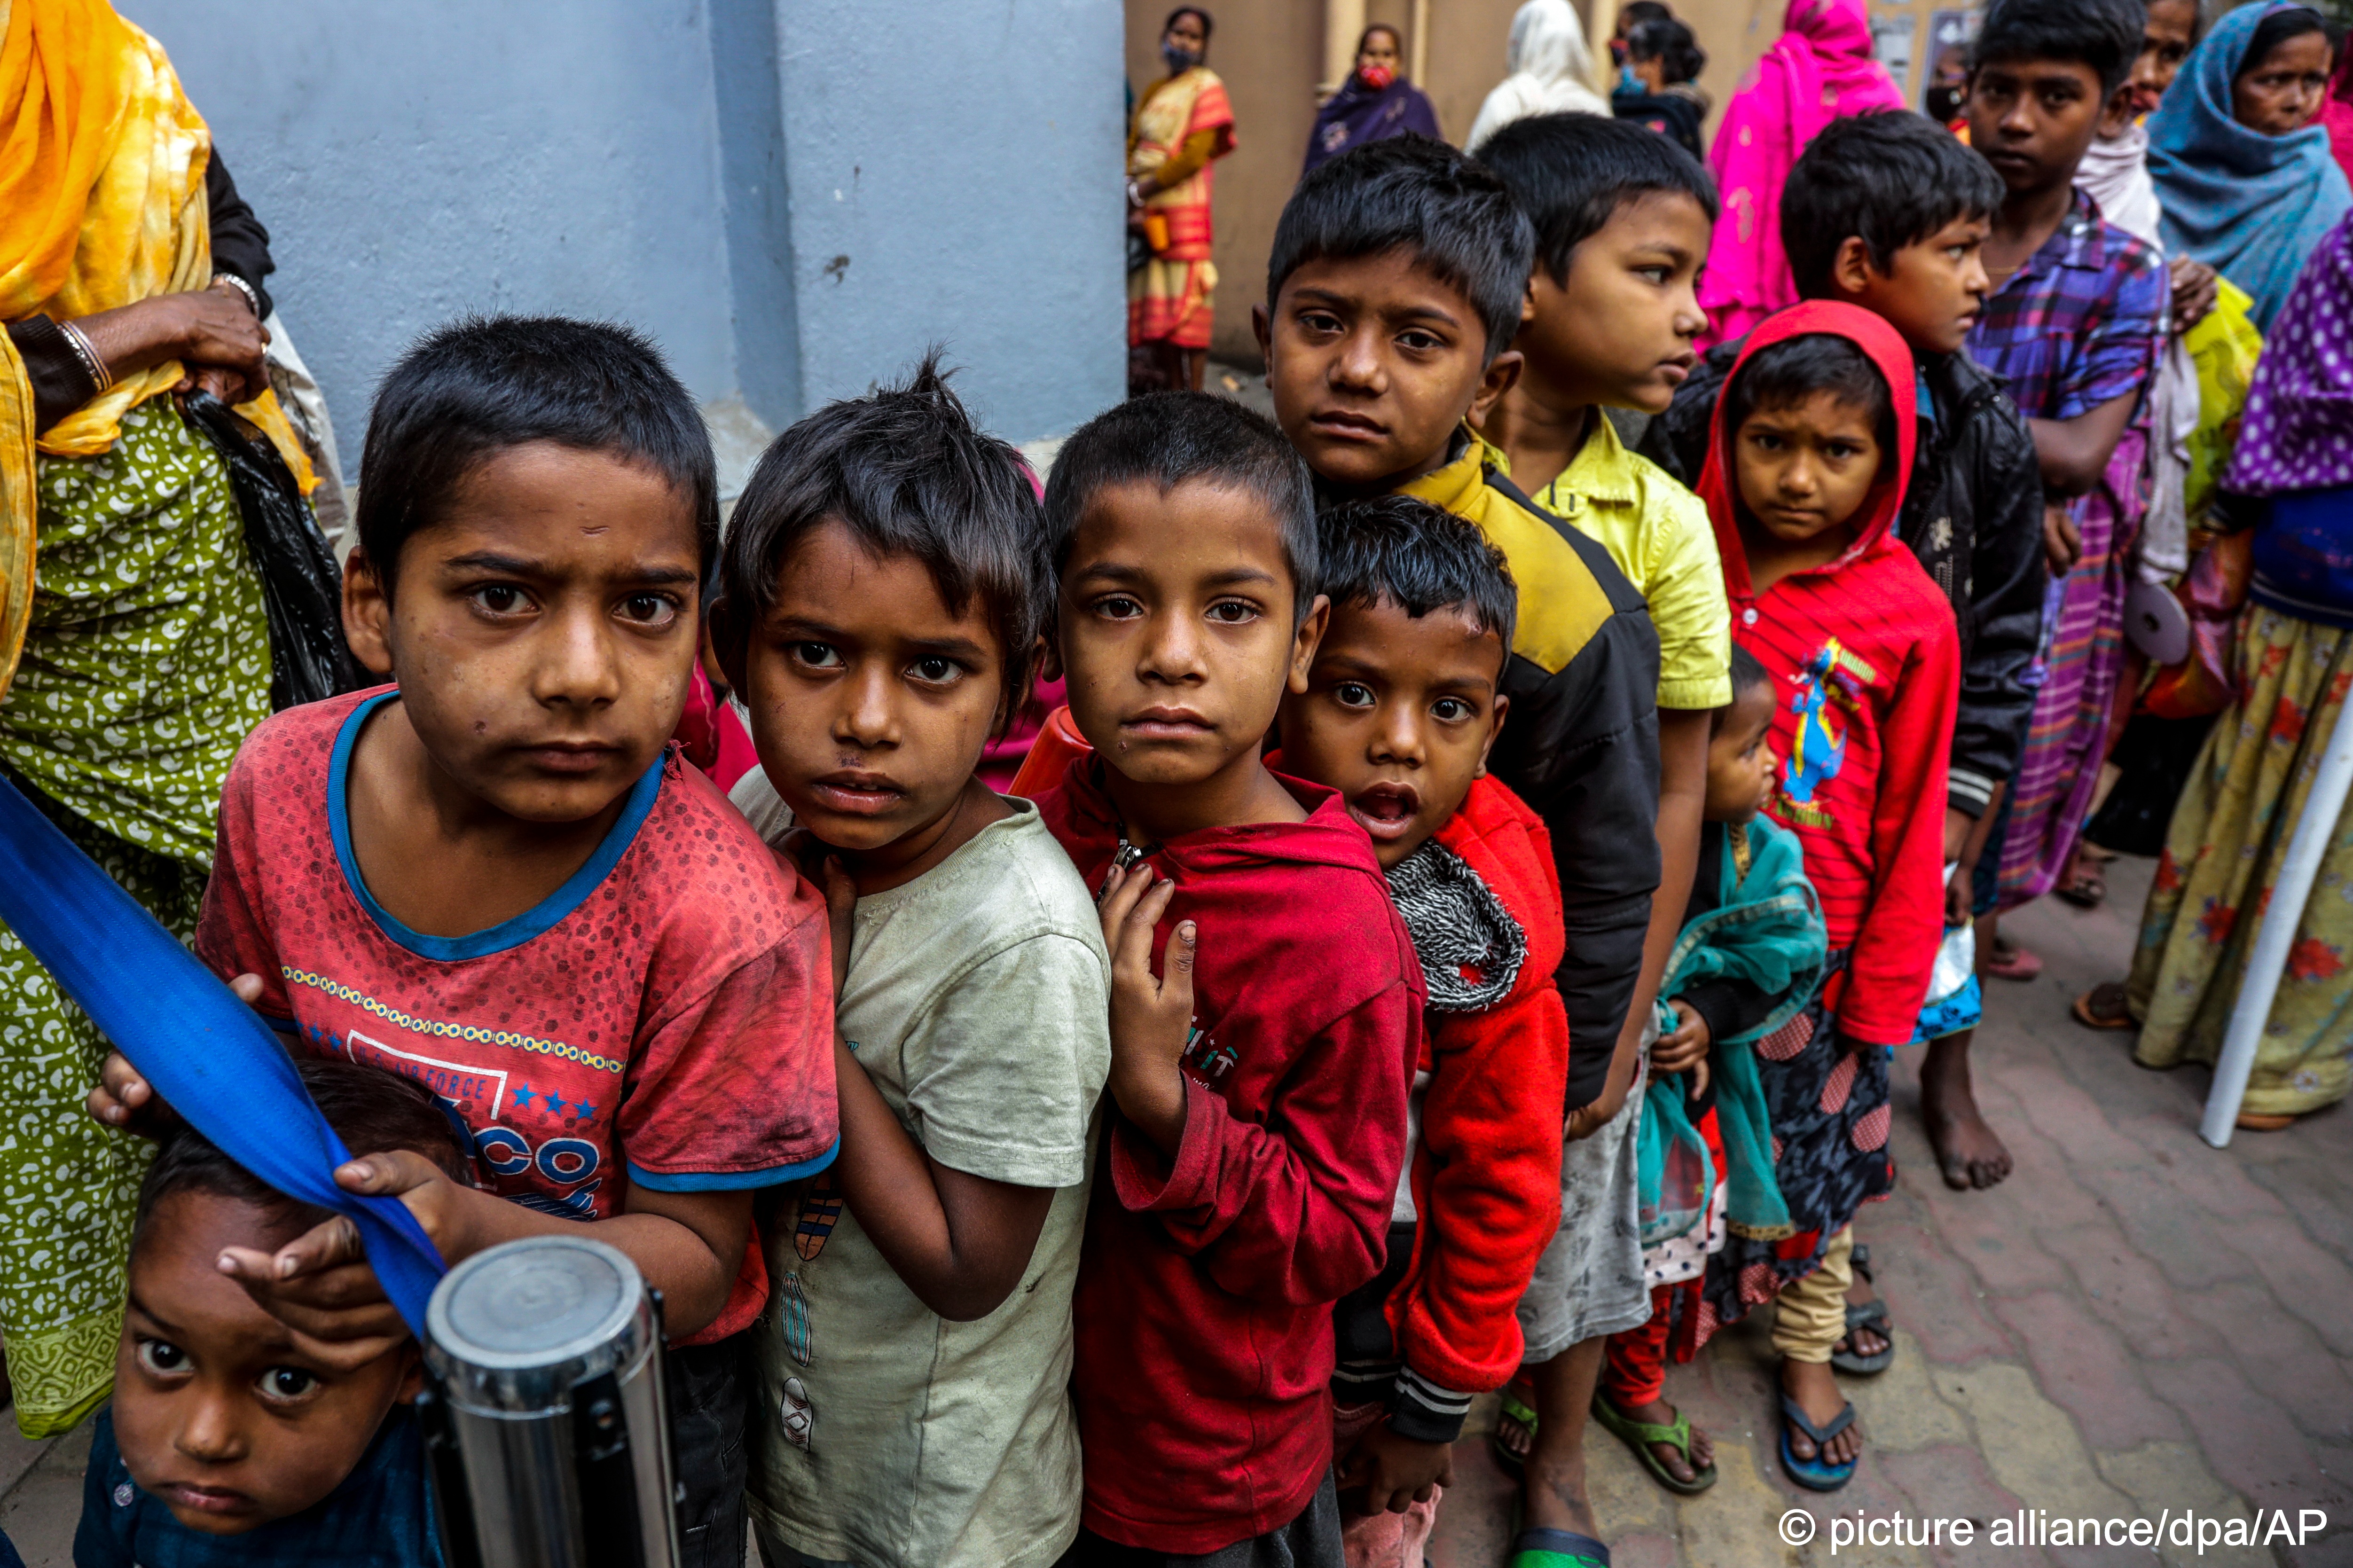 Homeless children in India queue to receive a morning meal from the Missionaries of Charity, an order founded by Mother Theresa (photo: picture alliance/dpa/AP/Bikas Das)